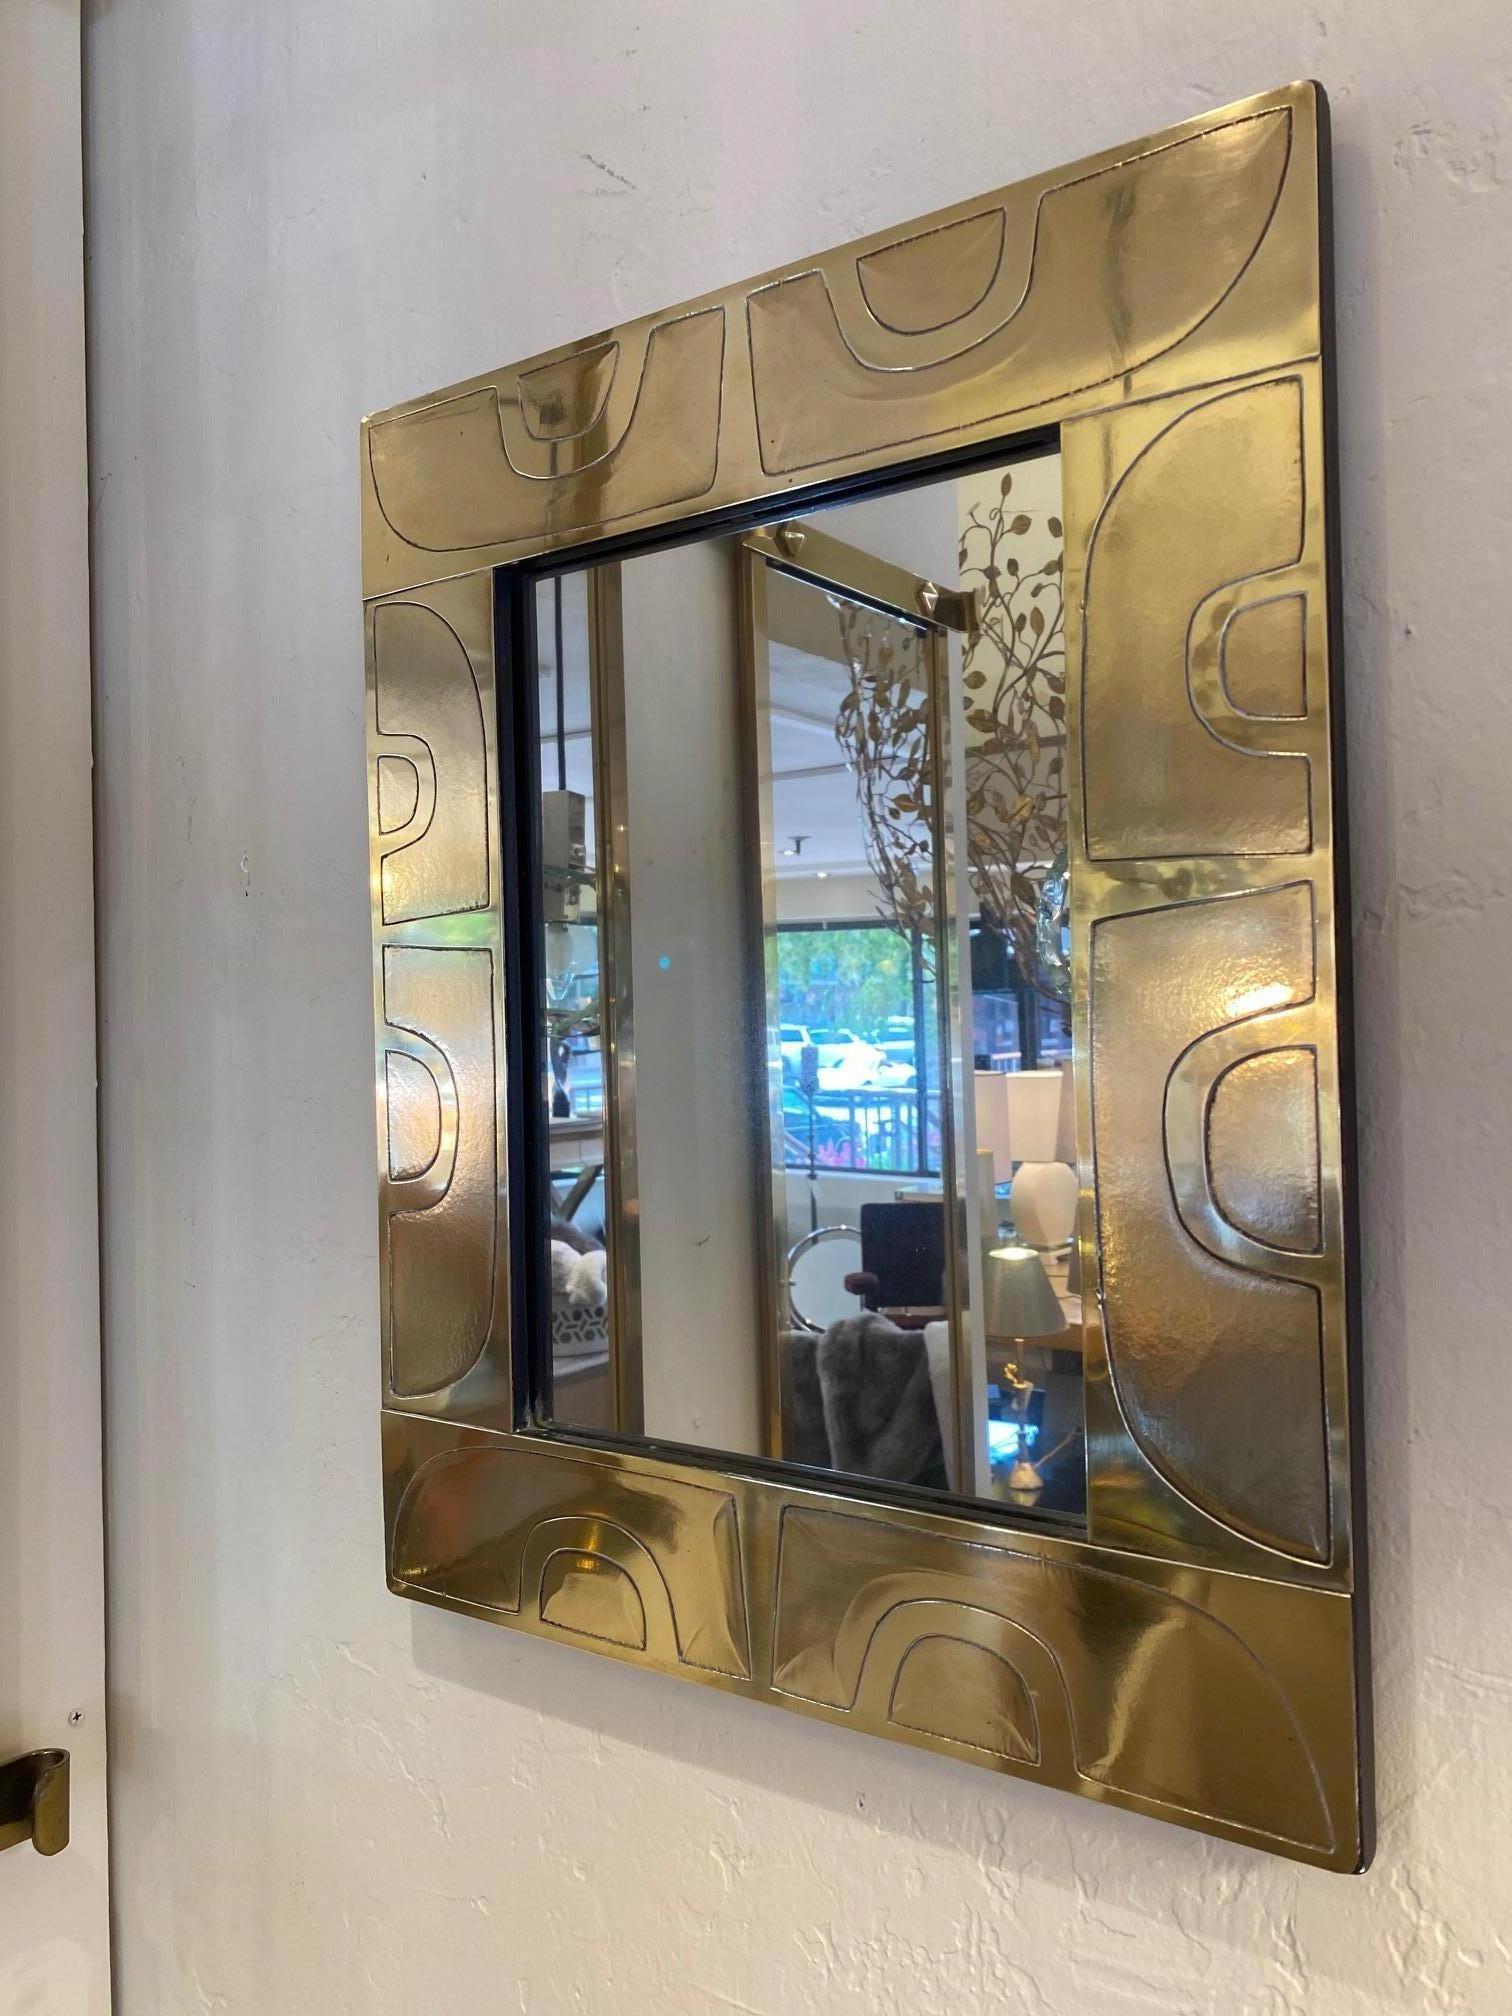 1980s French abstract design architectural rectangular mirror.